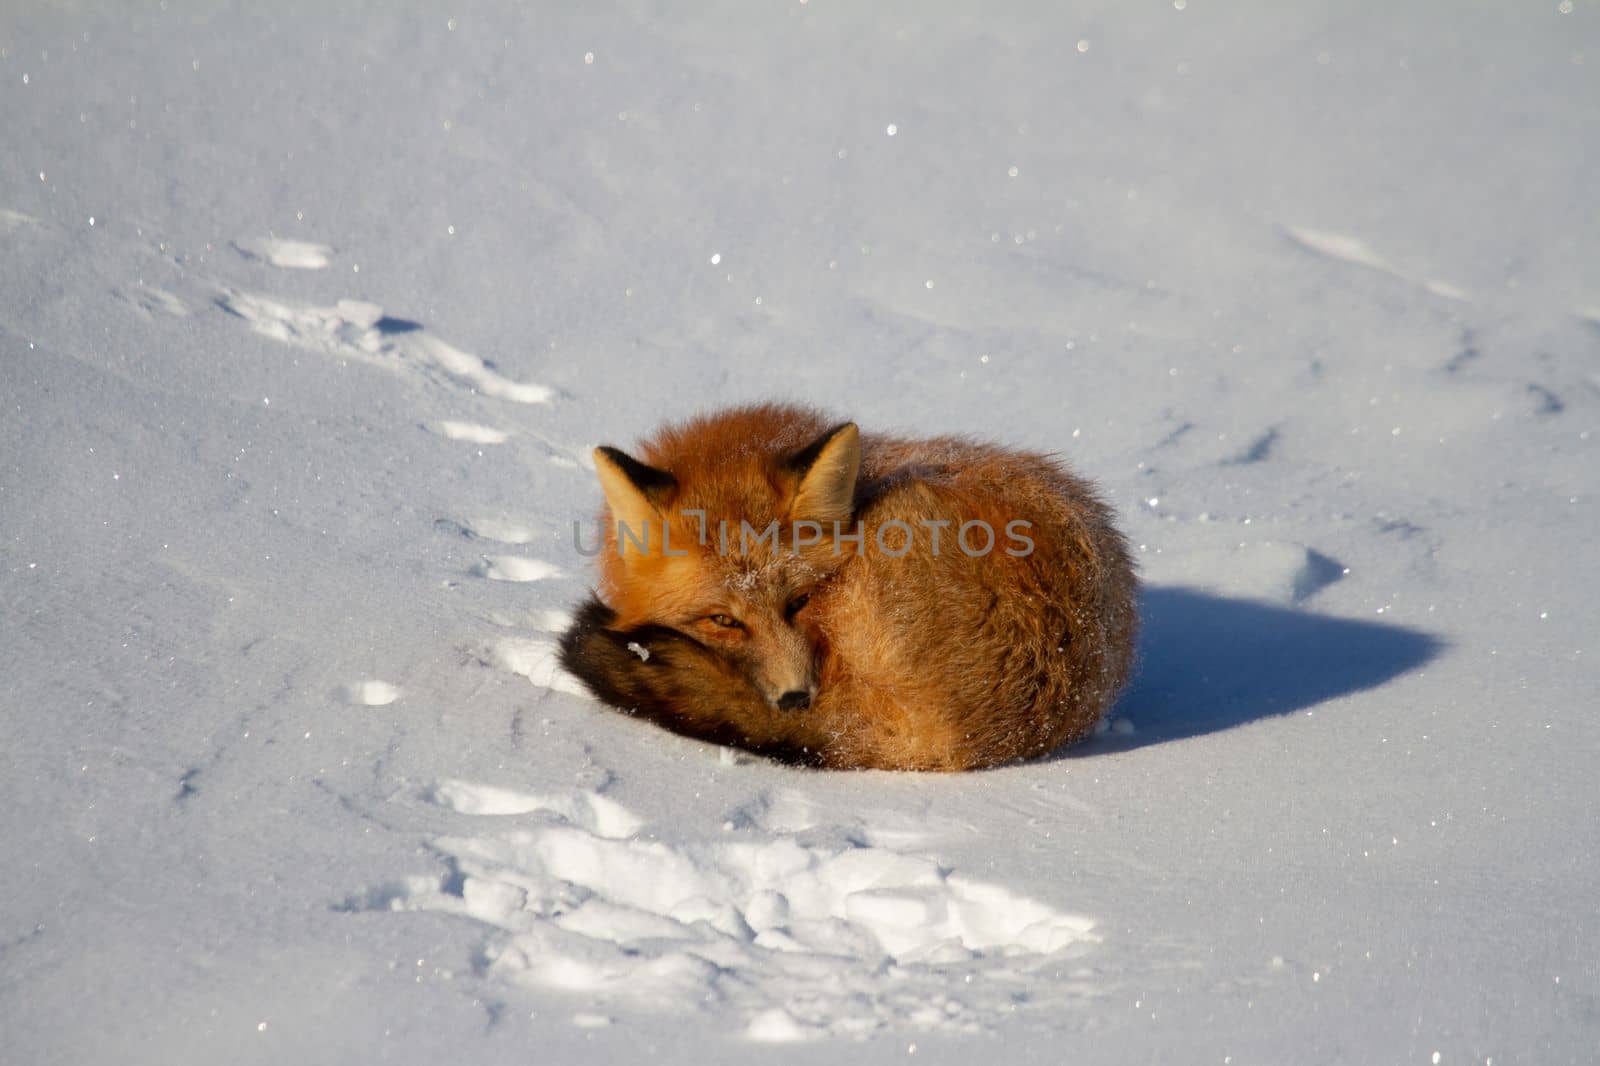 Red fox or Vulpes vulpes curled up in a snowbank near Churchill, Manitoba Canada by Granchinho